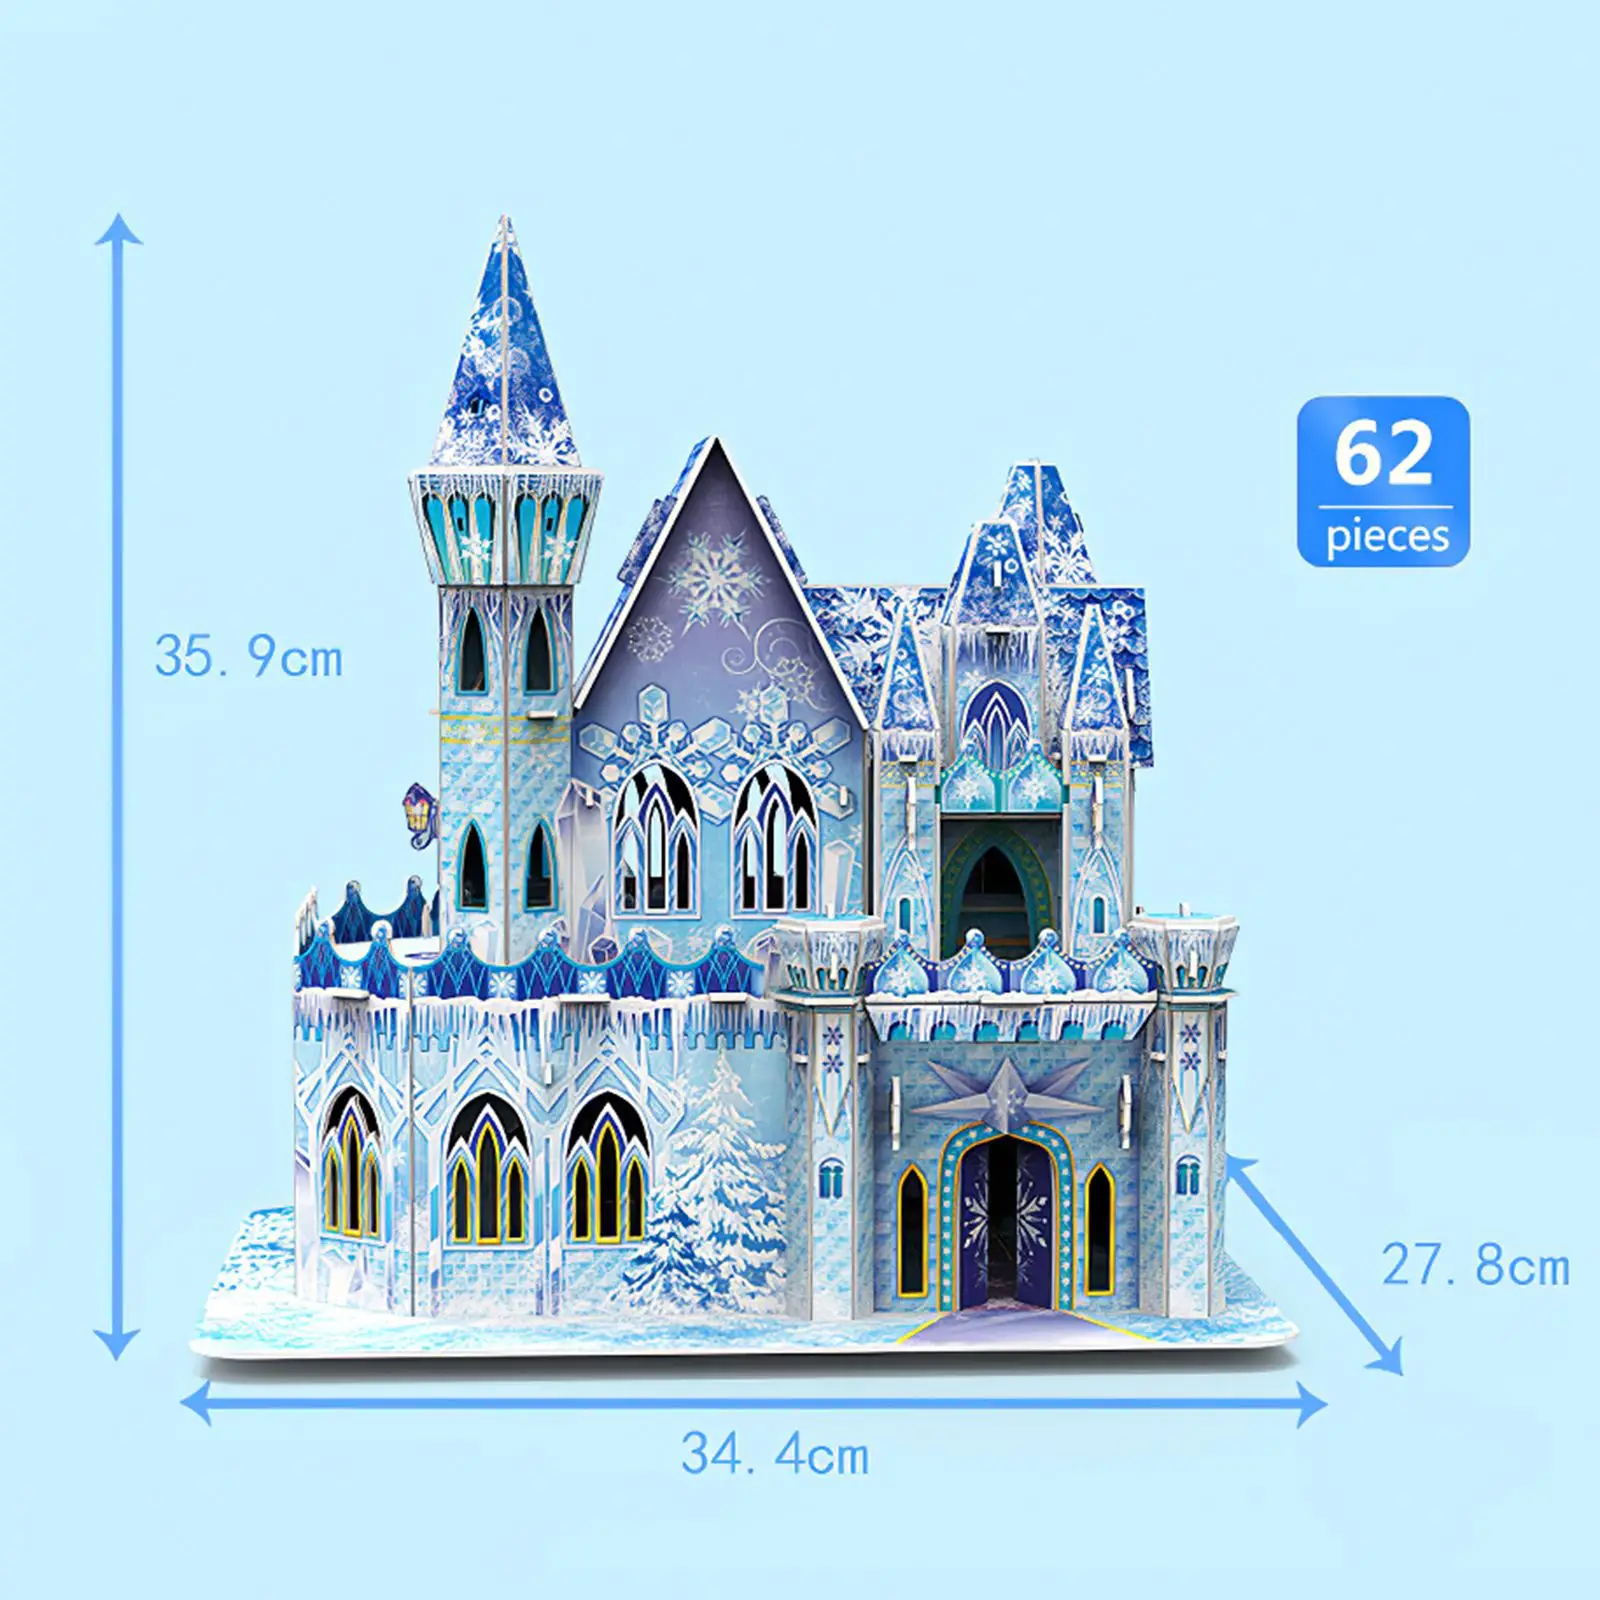 

62pcs Funny Playing Building Block Interactive Paper Building Puzzles Educational DIY Assemble Model Ice Castle Assemble Toy